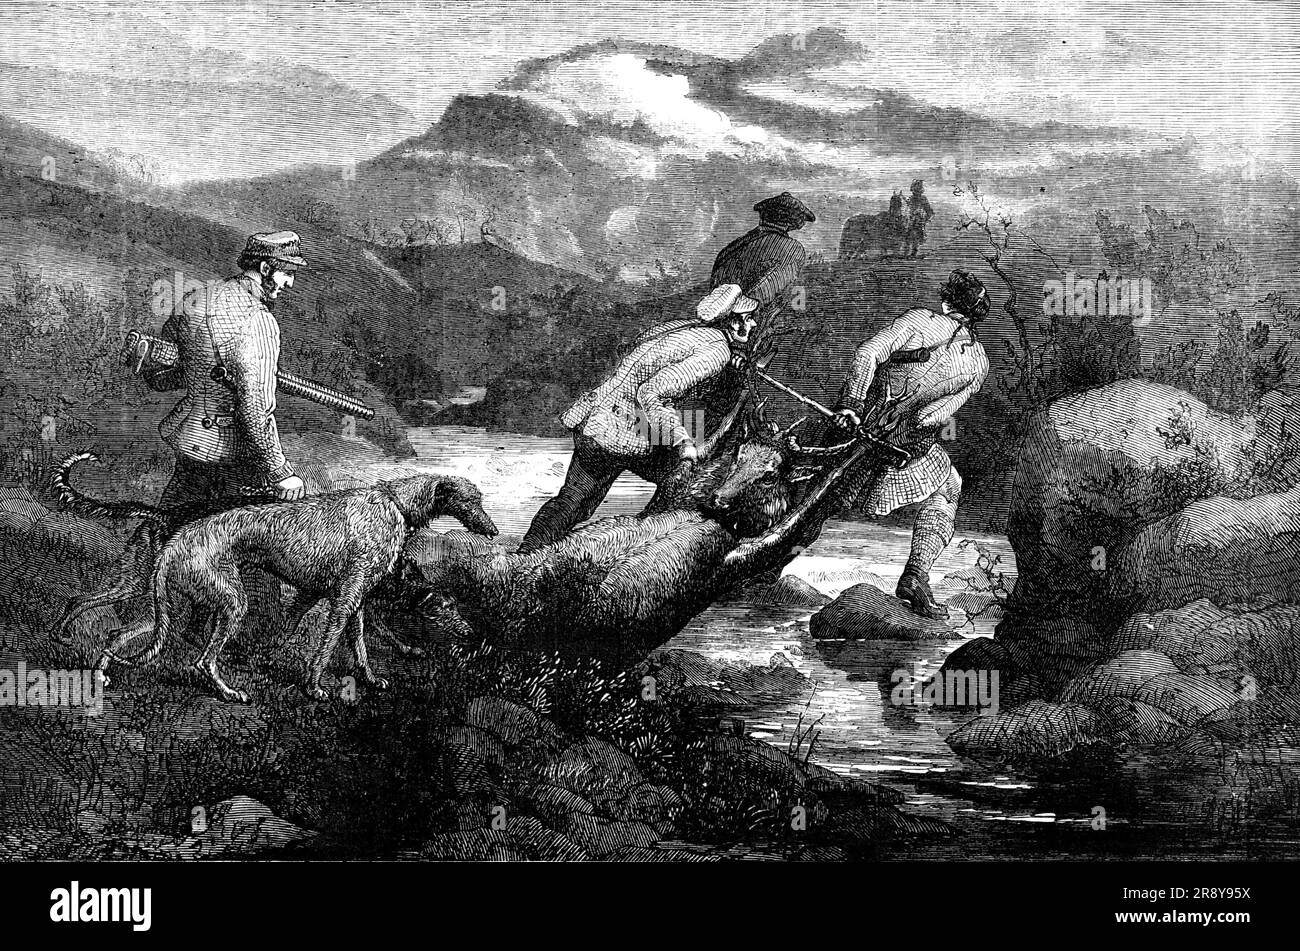 &quot;Bringing Home the Deer&quot; - painted by Bottomley, 1857. 'This characteristic scene is engraved from a drawing made by Mr. Bottomley on a recent visit to the Highlands of Scotland. The locality is the wild and desolate district well known to sportsmen as the Marquis of Breadalbane's Deer Forest of Blackmount. The Artist thus describes the incident: The gralloching being over, a stick was quickly tied to the horns of the hart, and the strong foresters carried off the heavy animal through the stream, over the hills to the point where the pony was waiting to bring the prize home. Followin Stock Photo